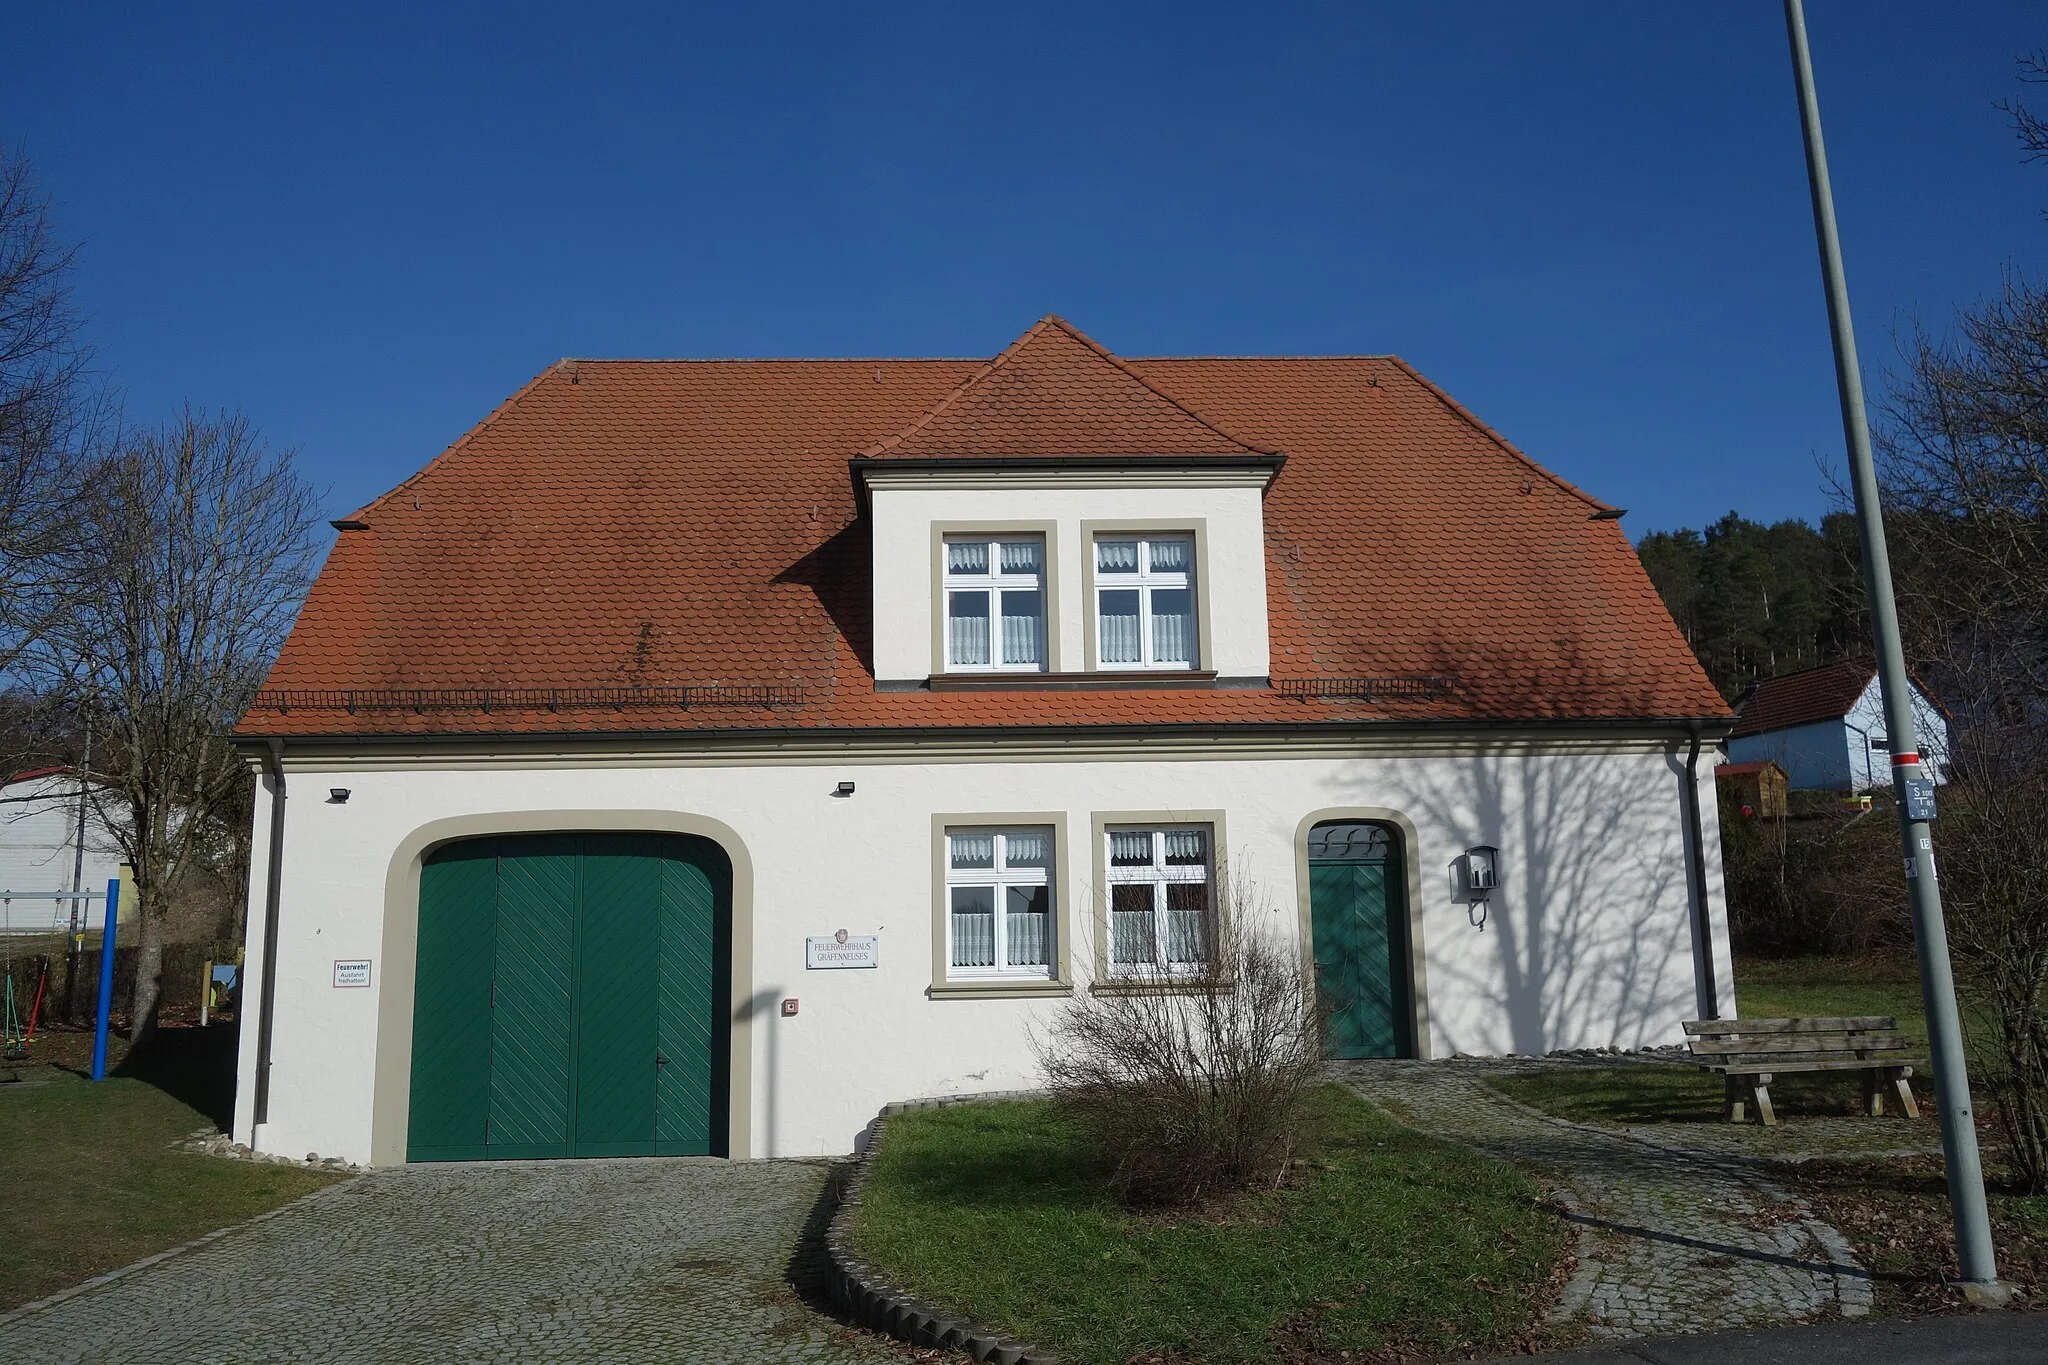 Photo showing: The fire house in Gräfenneuses, a village of Geiselwind, a town in northern Bavaria.